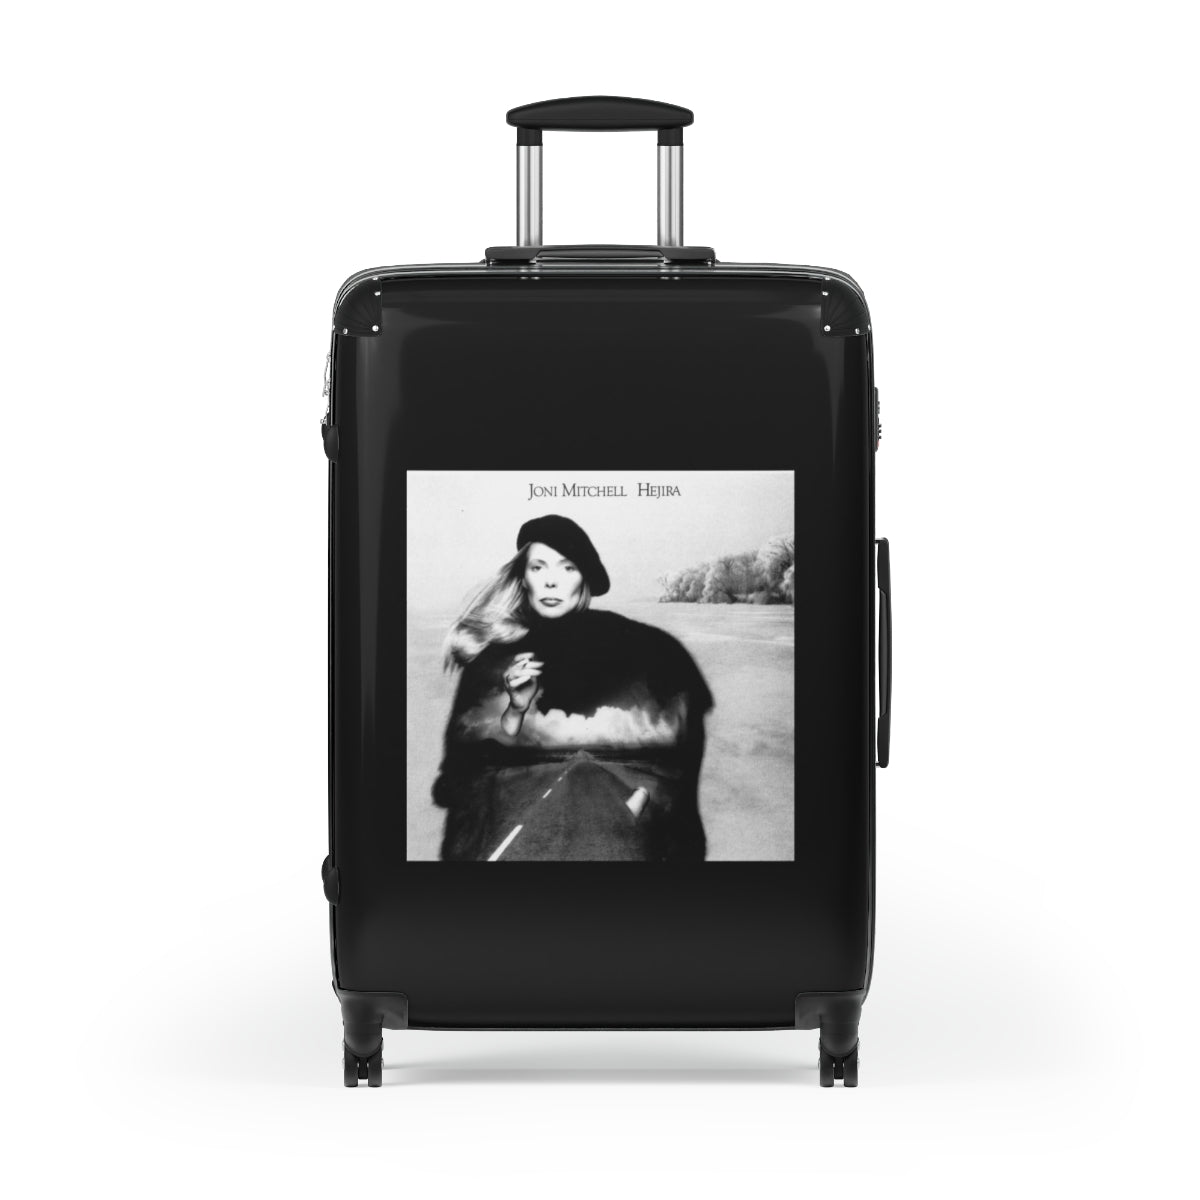 Getrott Joni Mitchell Hejira 1976 Black Cabin Suitcase Inner Pockets Extended Storage Adjustable Telescopic Handle Inner Pockets Double wheeled Polycarbonate Hard-shell Built-in Lock